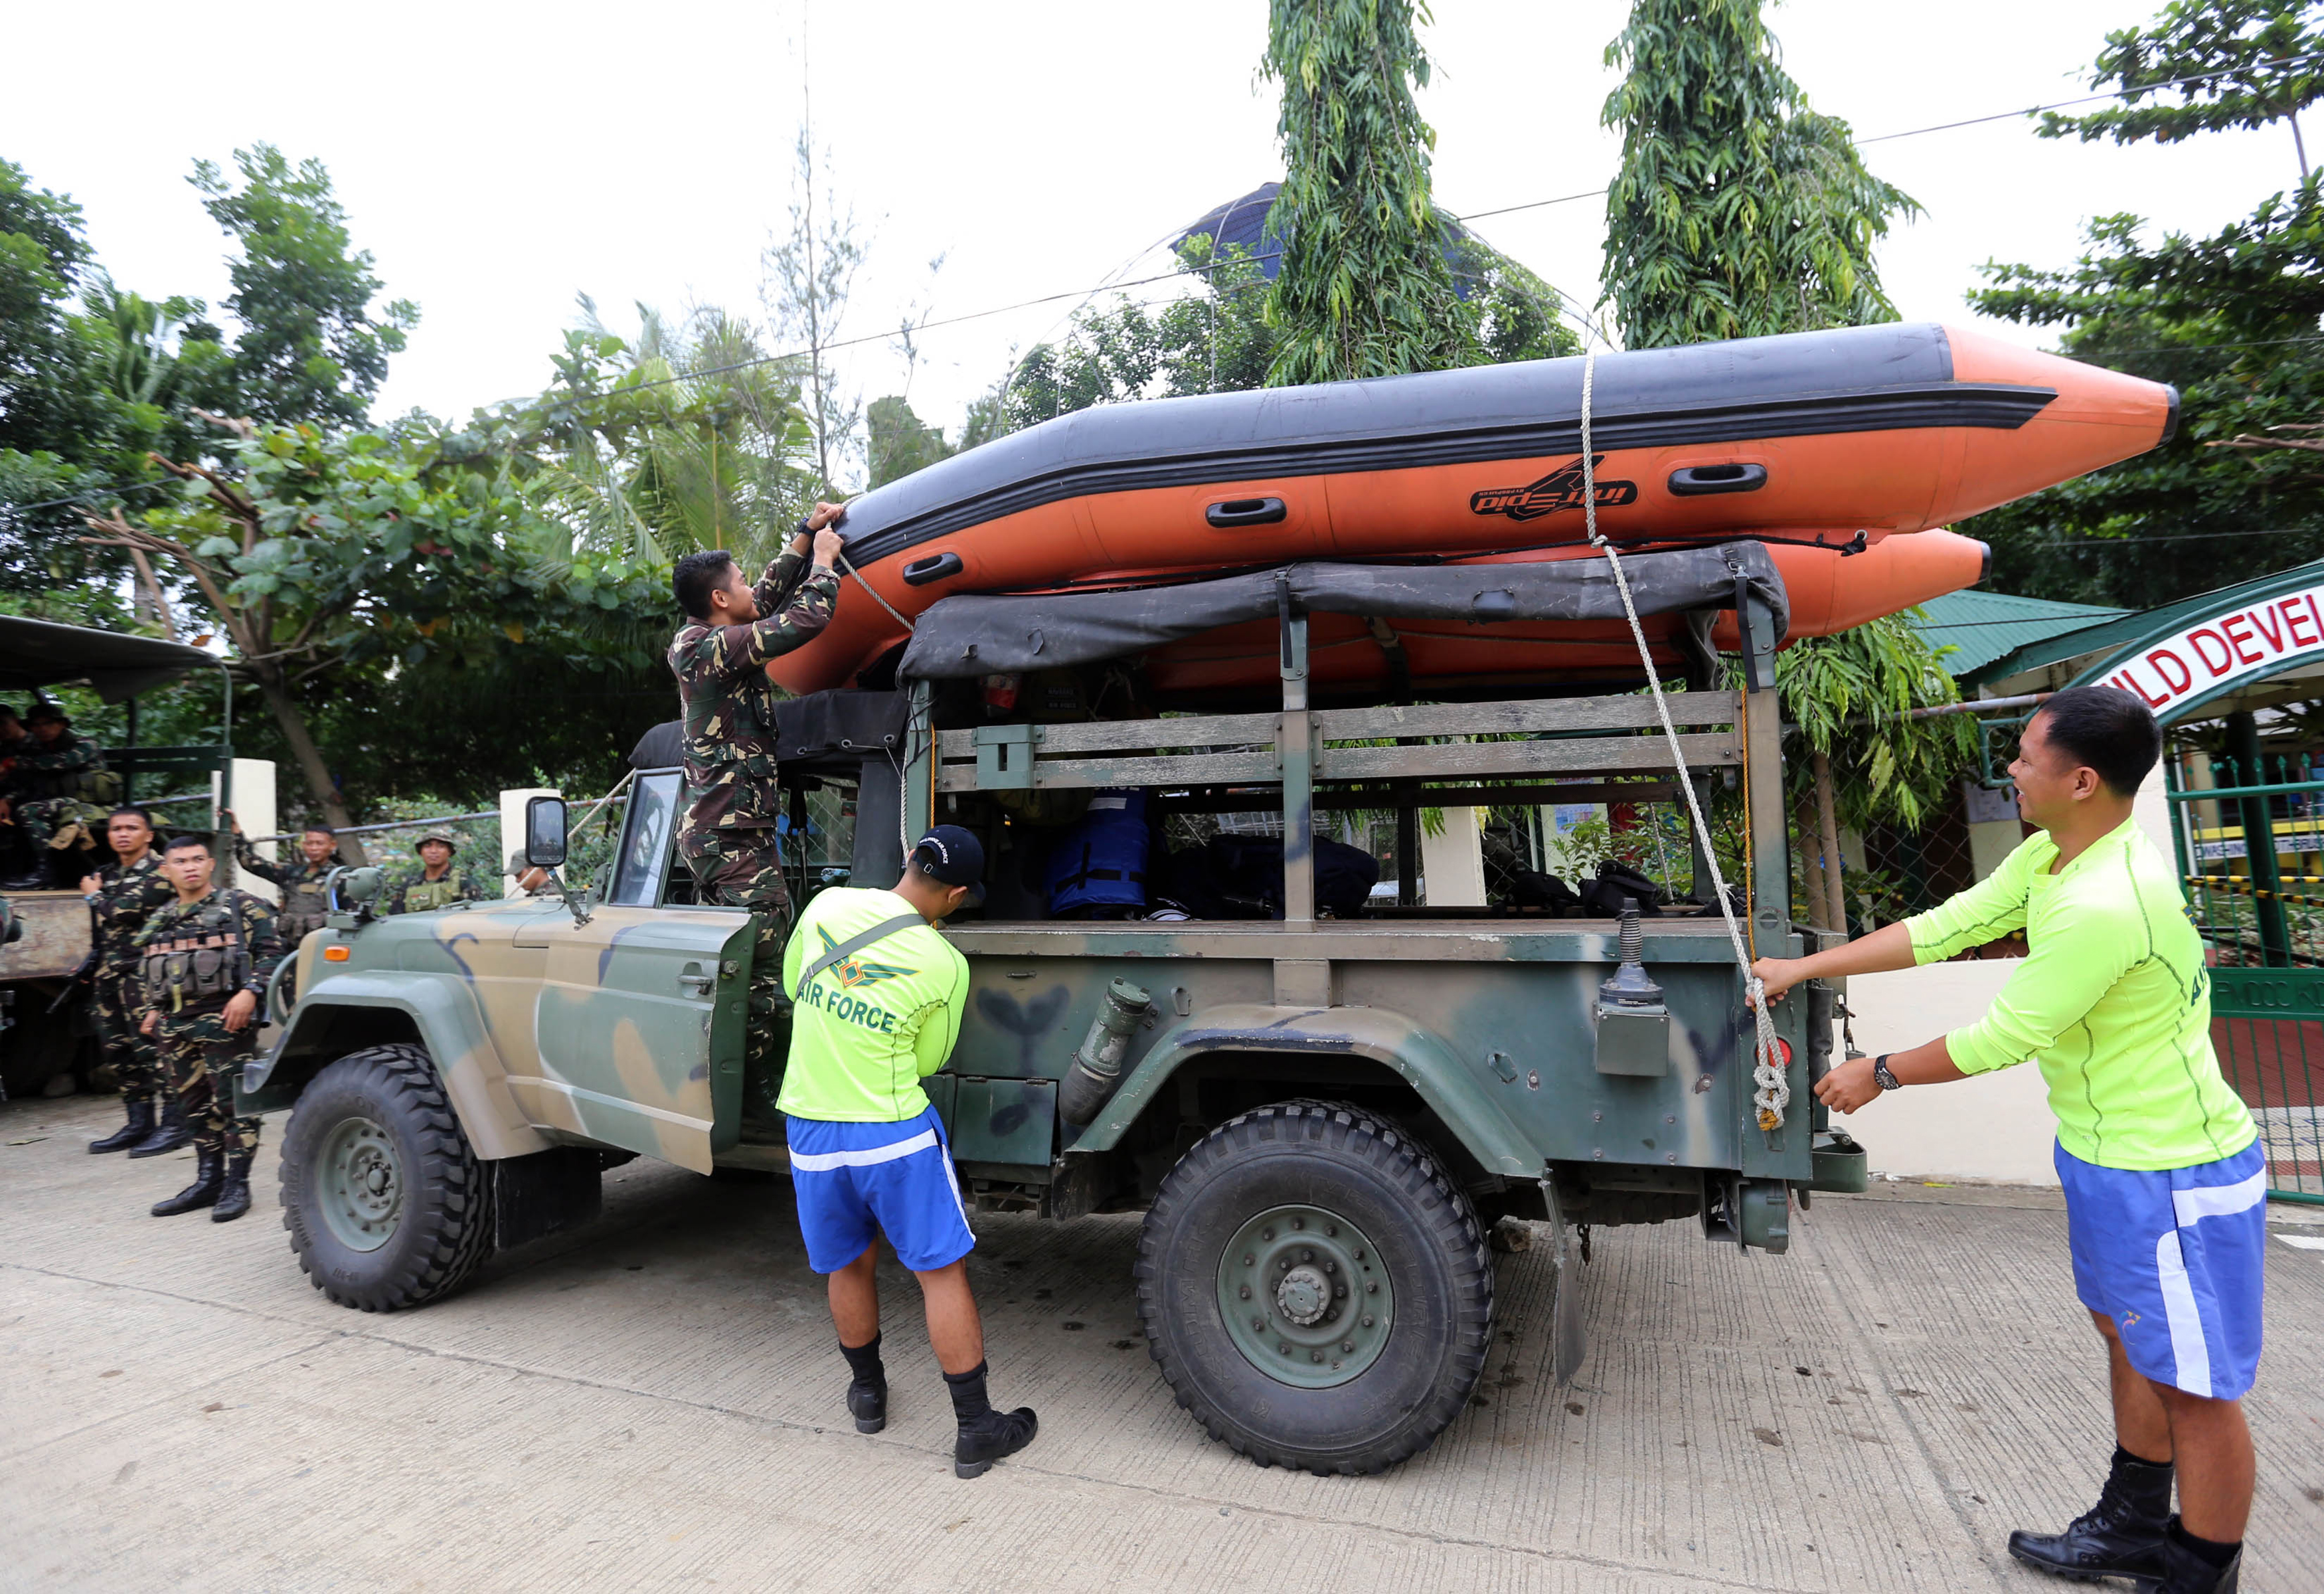 Rescuers load a rubber boat onto their vehicle as they prepare for Typhoon Haima in Ilagan town, Isabela province on October 19, 2016. Millions of people in the Philippines were ordered on October 19 to prepare for one of the strongest typhoons to ever hit the disaster-battered country, with authorities warning of giant storm surges and destructive winds. / AFP PHOTO / STR